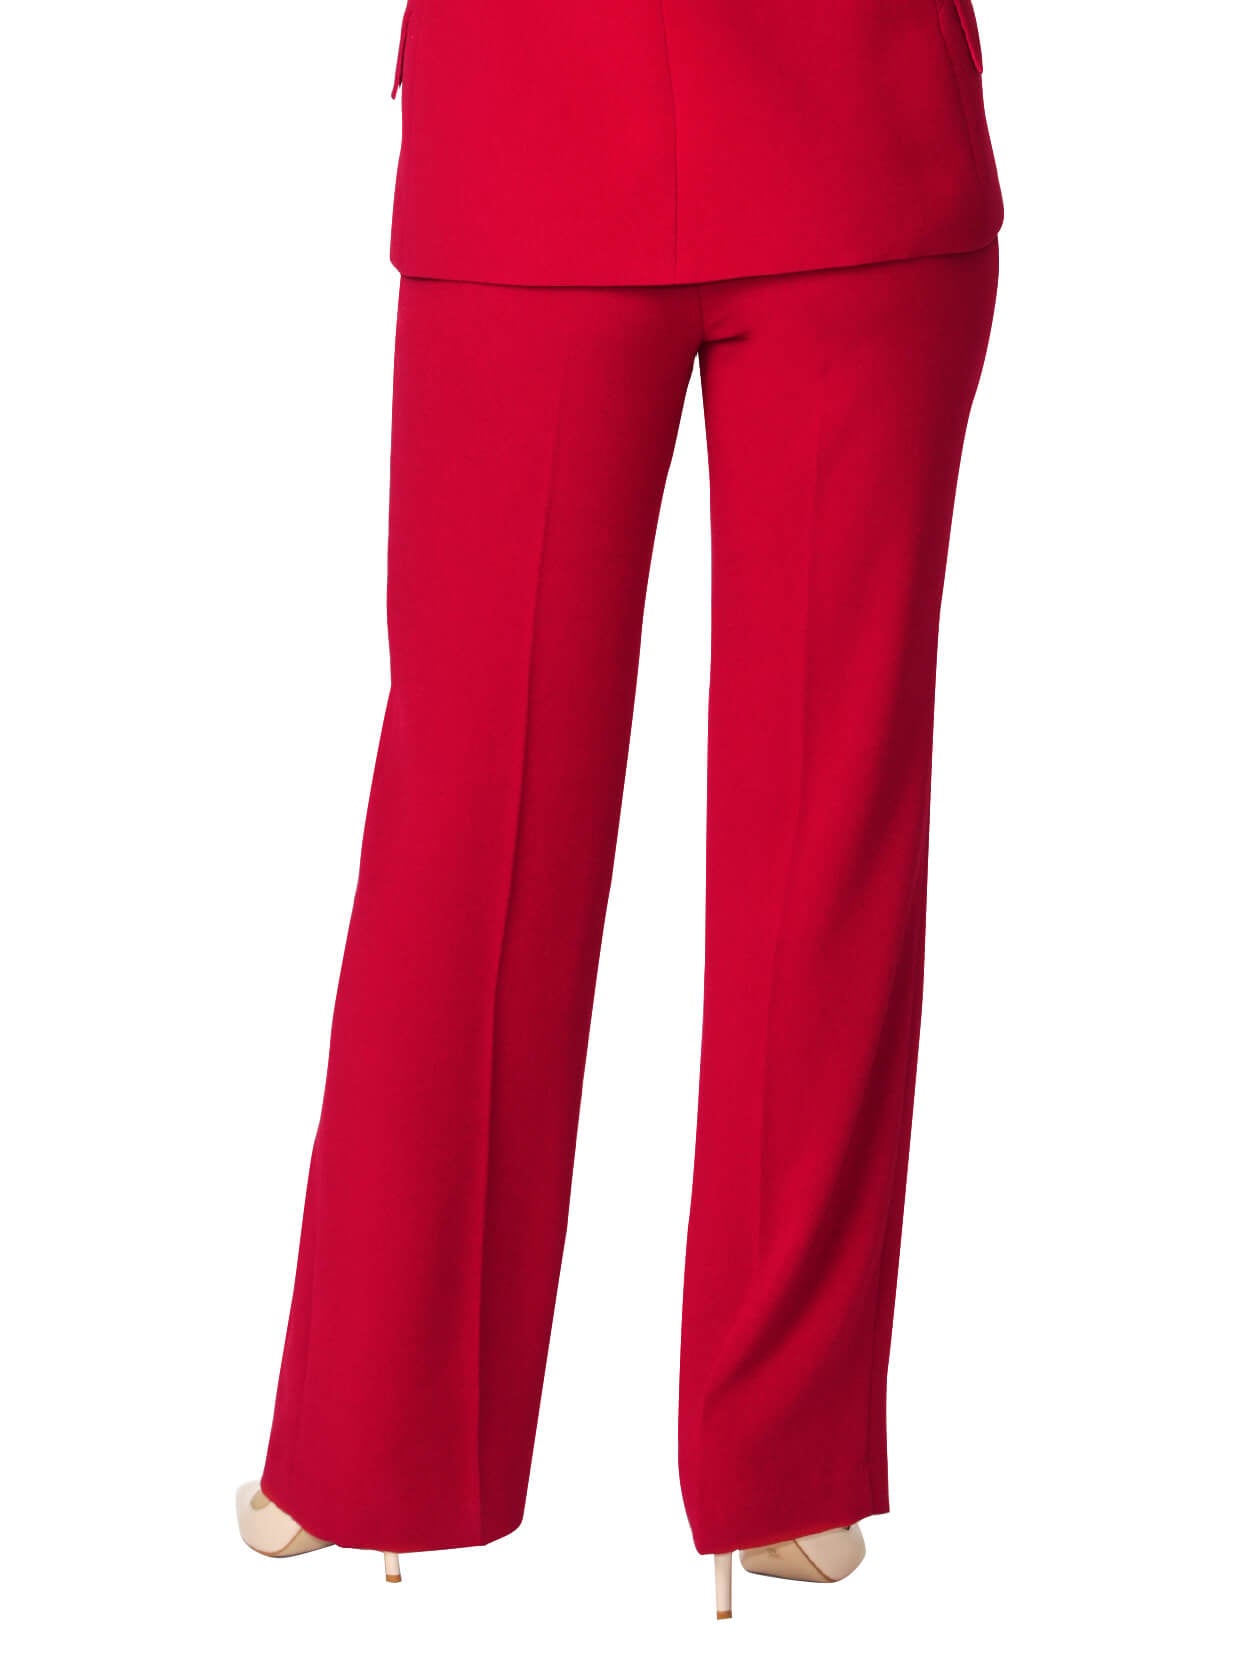 Women's Crepe Pant in Red